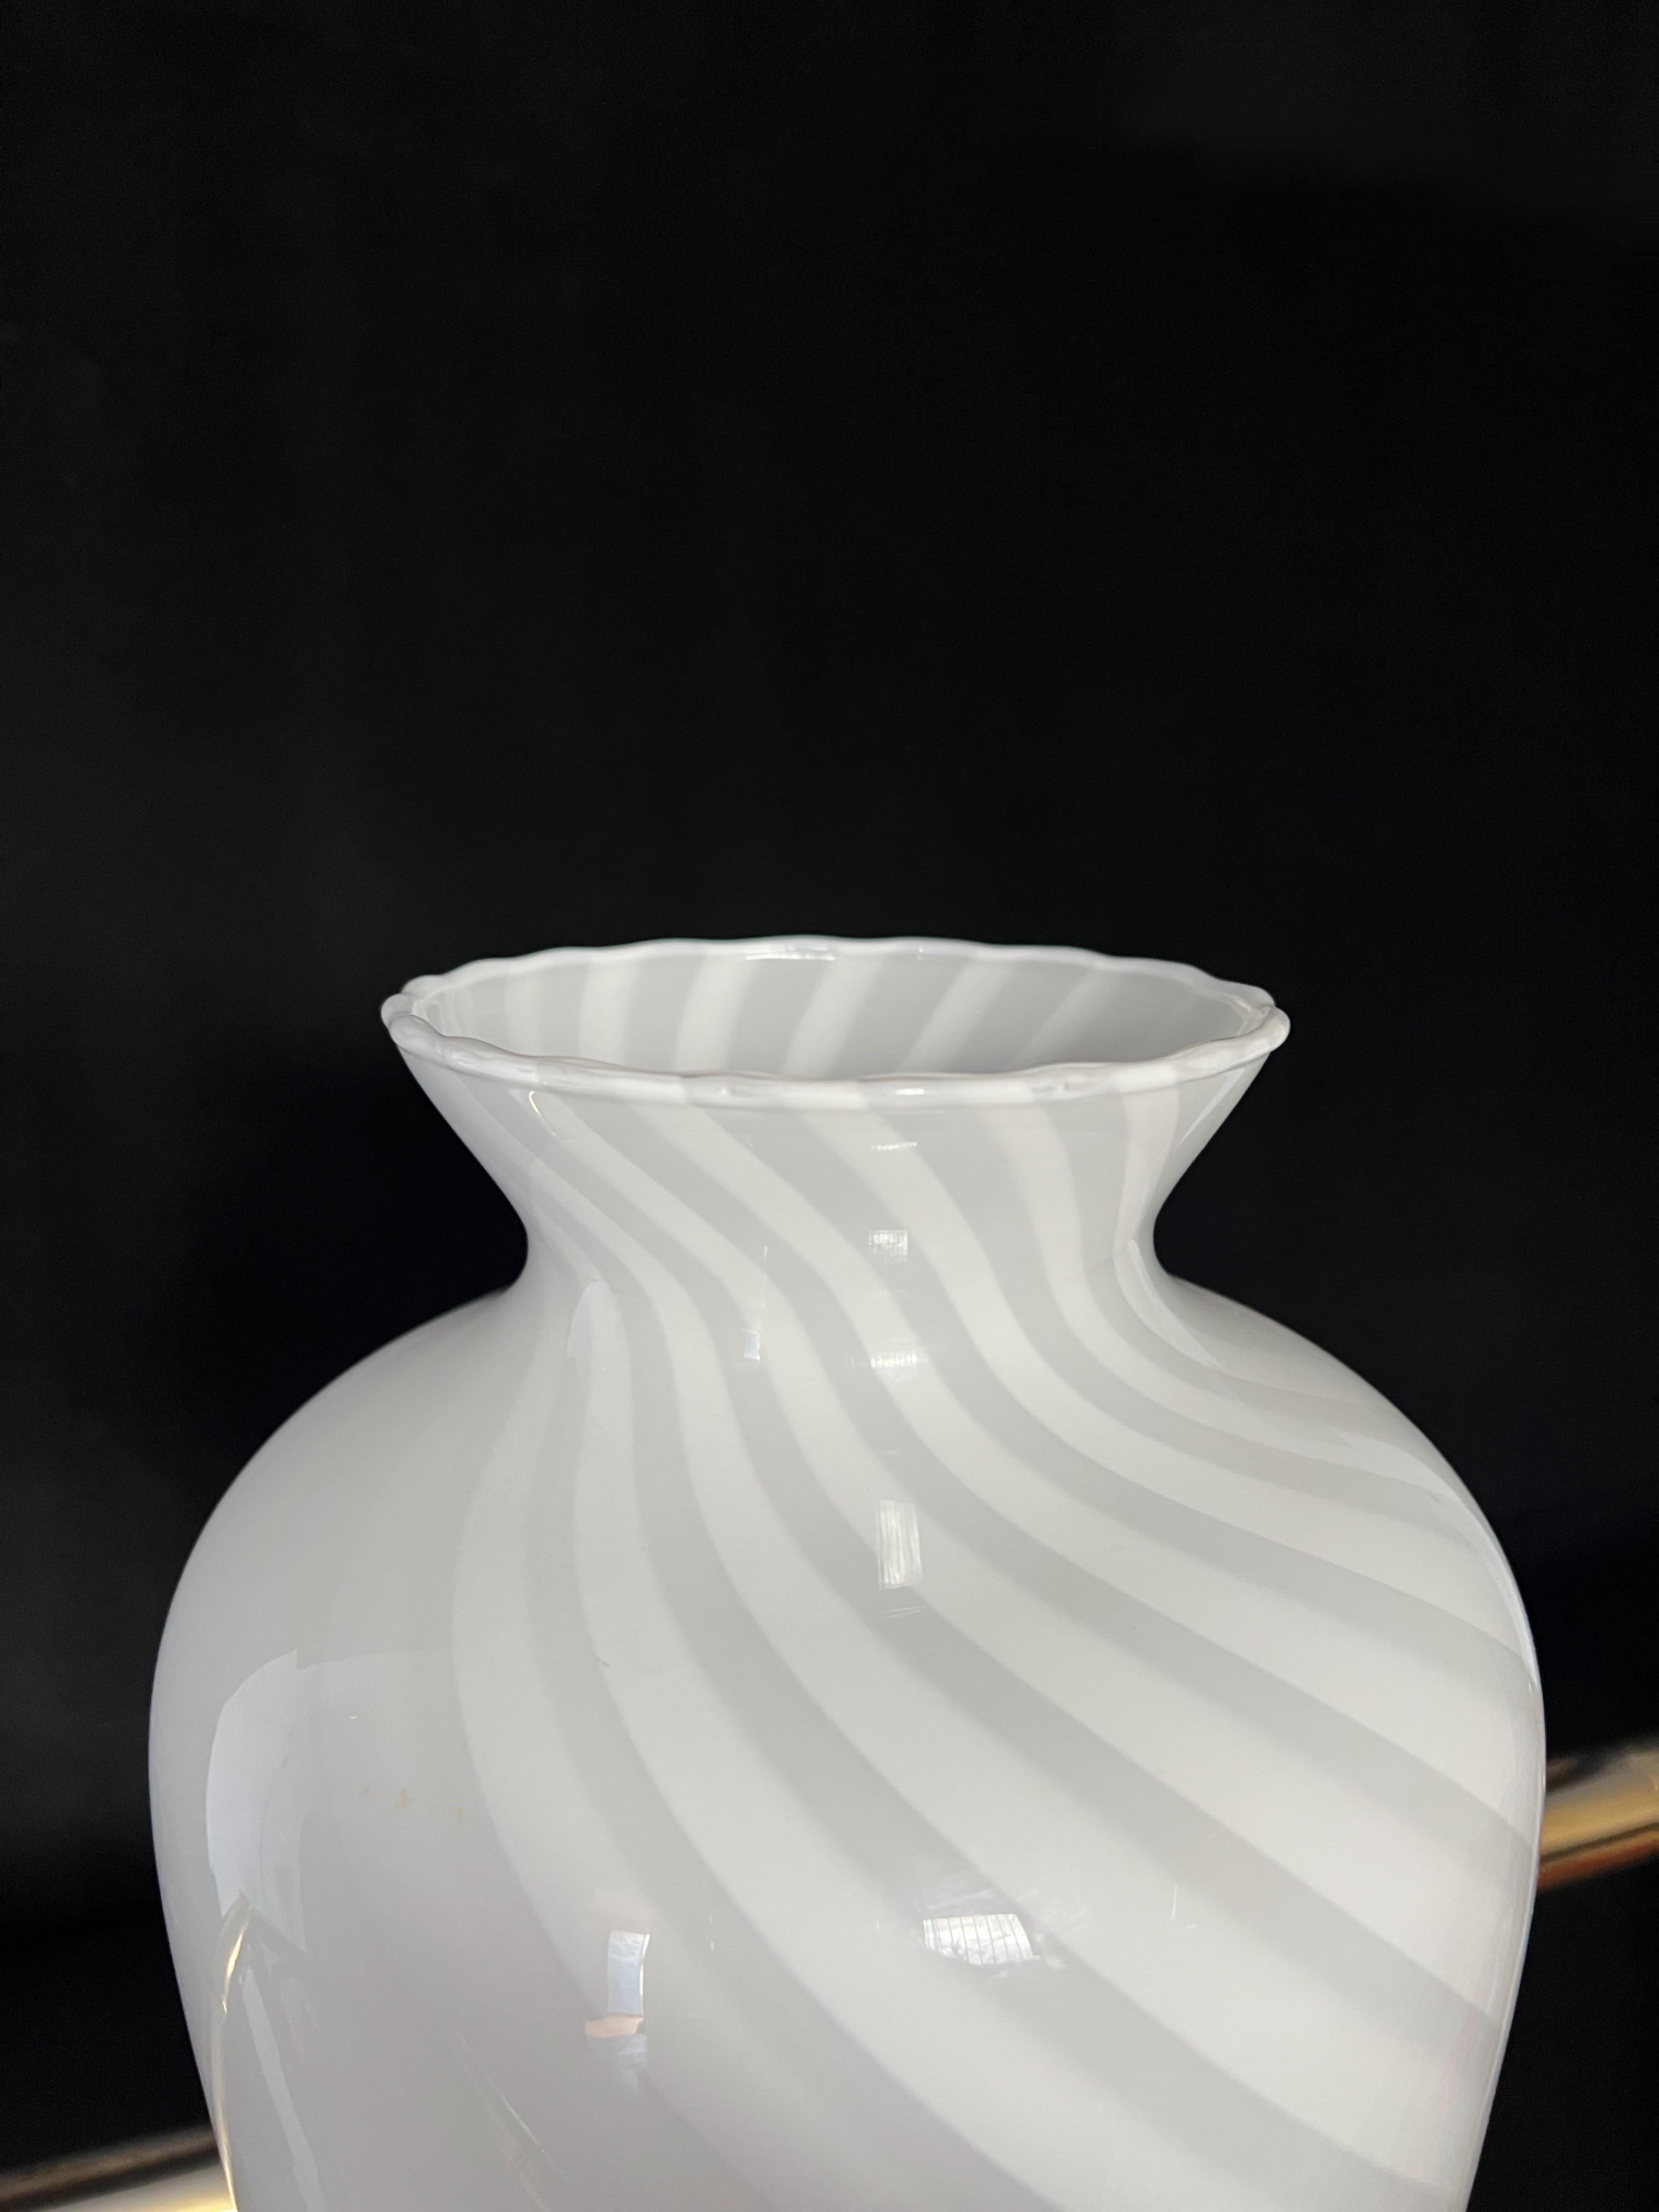 20th Century Mid Century Modern Murano Glass Vase attributed to Venini, 1970s For Sale